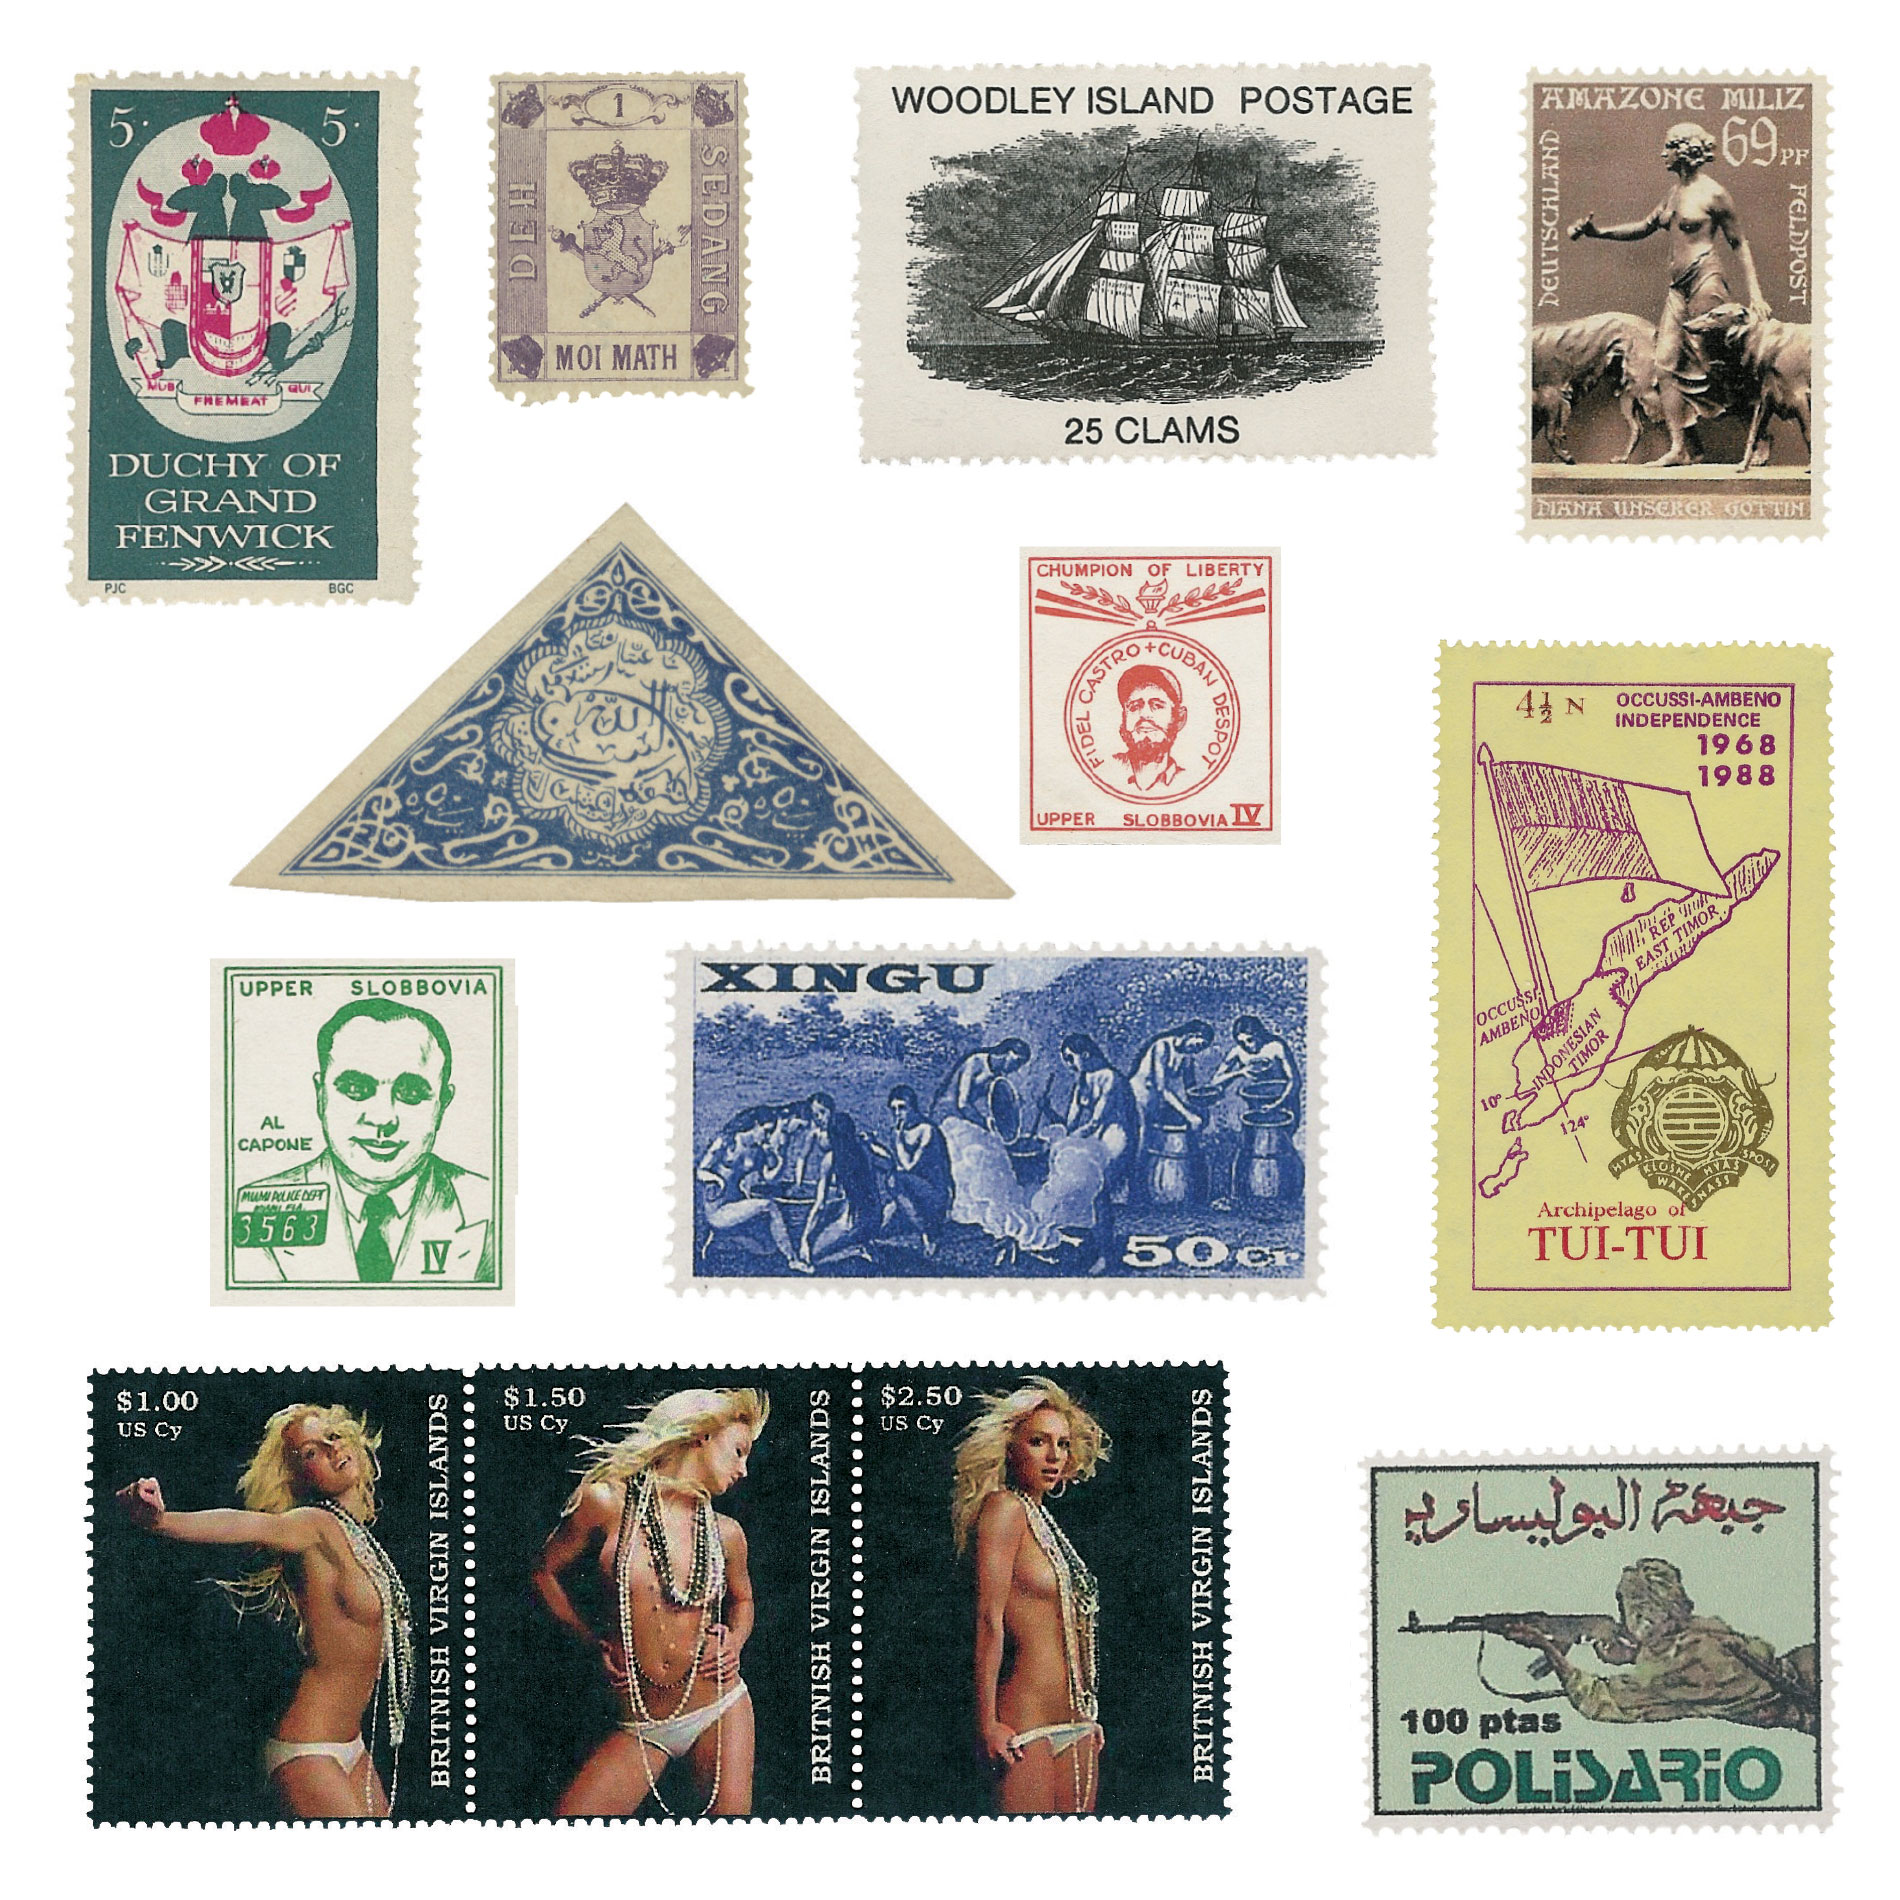 Cinderella stamps from the authors’ collection.